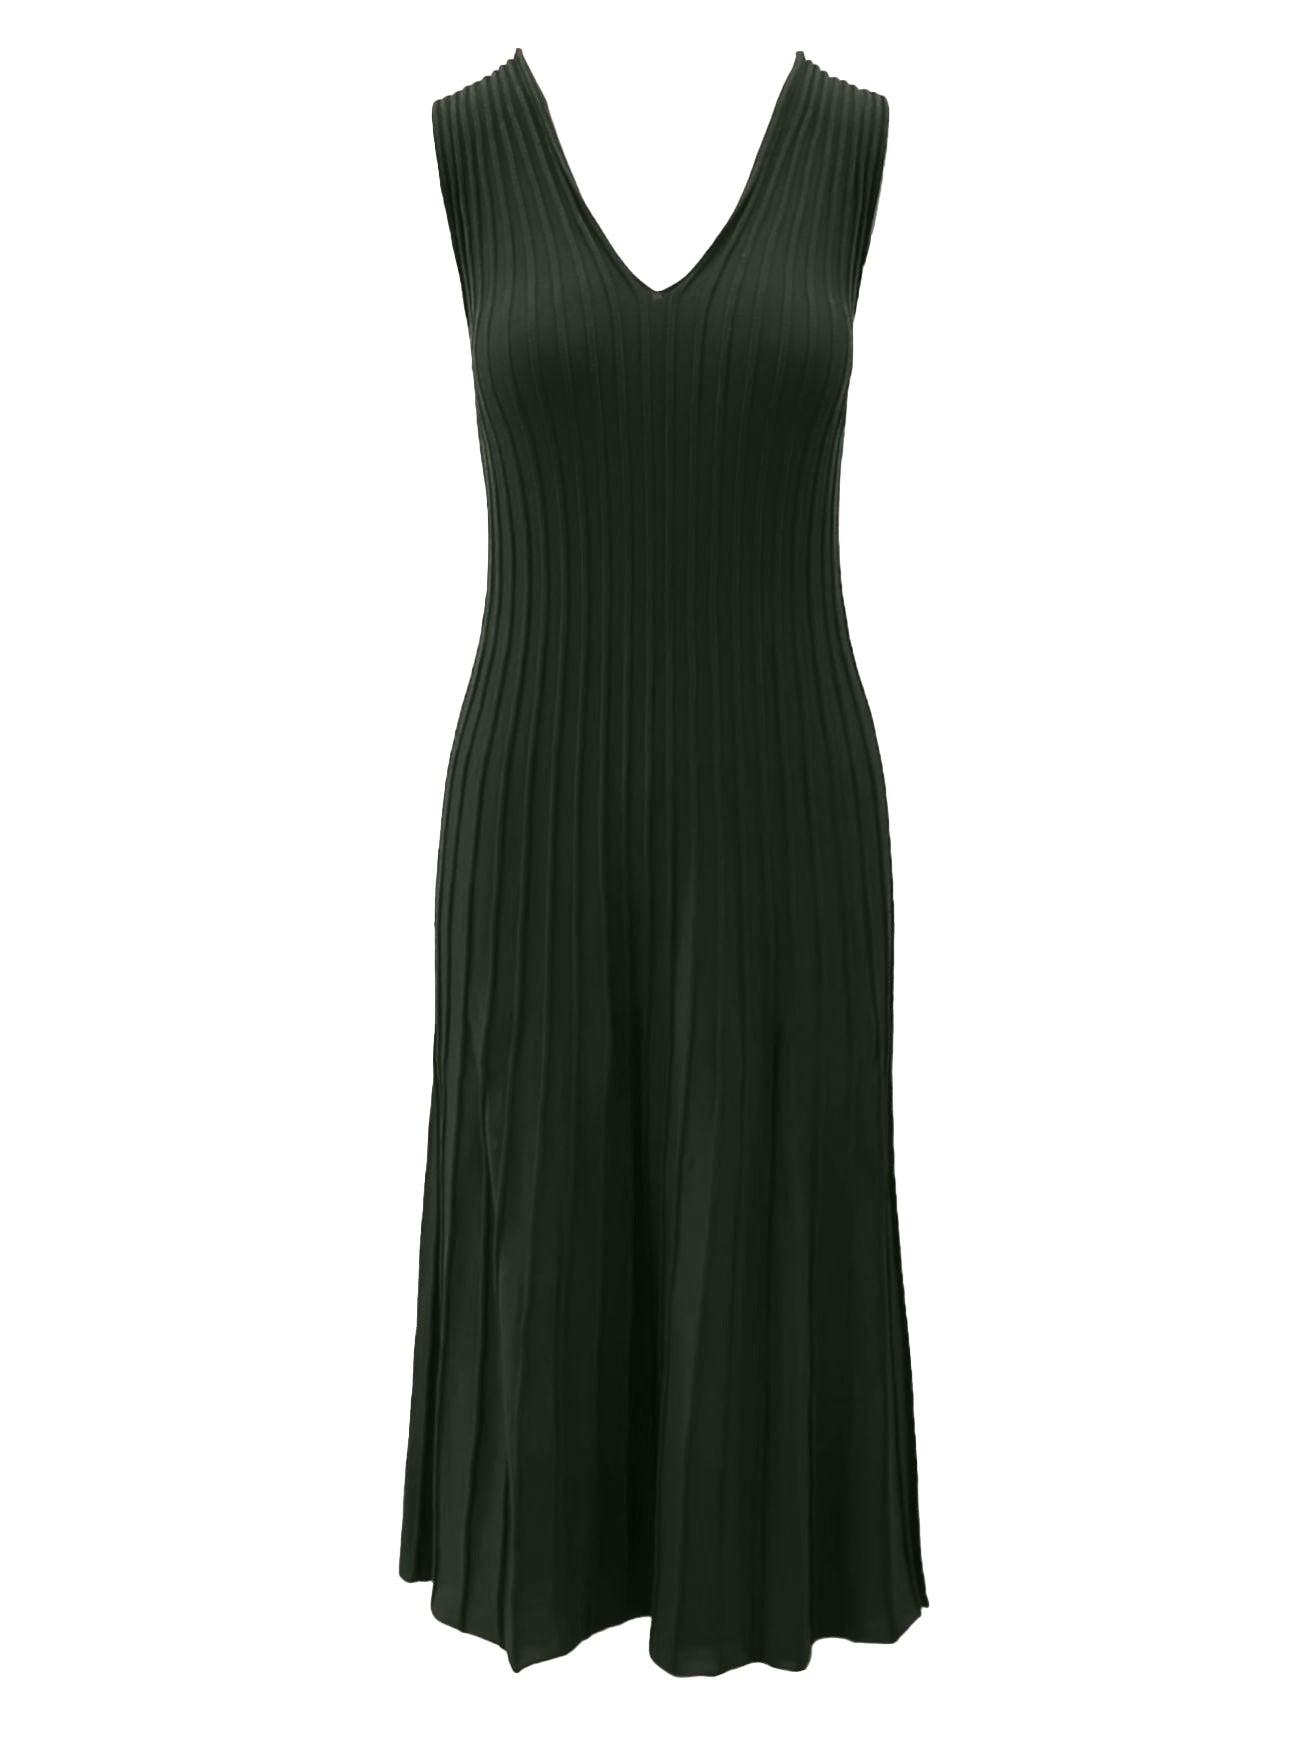 kendall loden ribbed dress